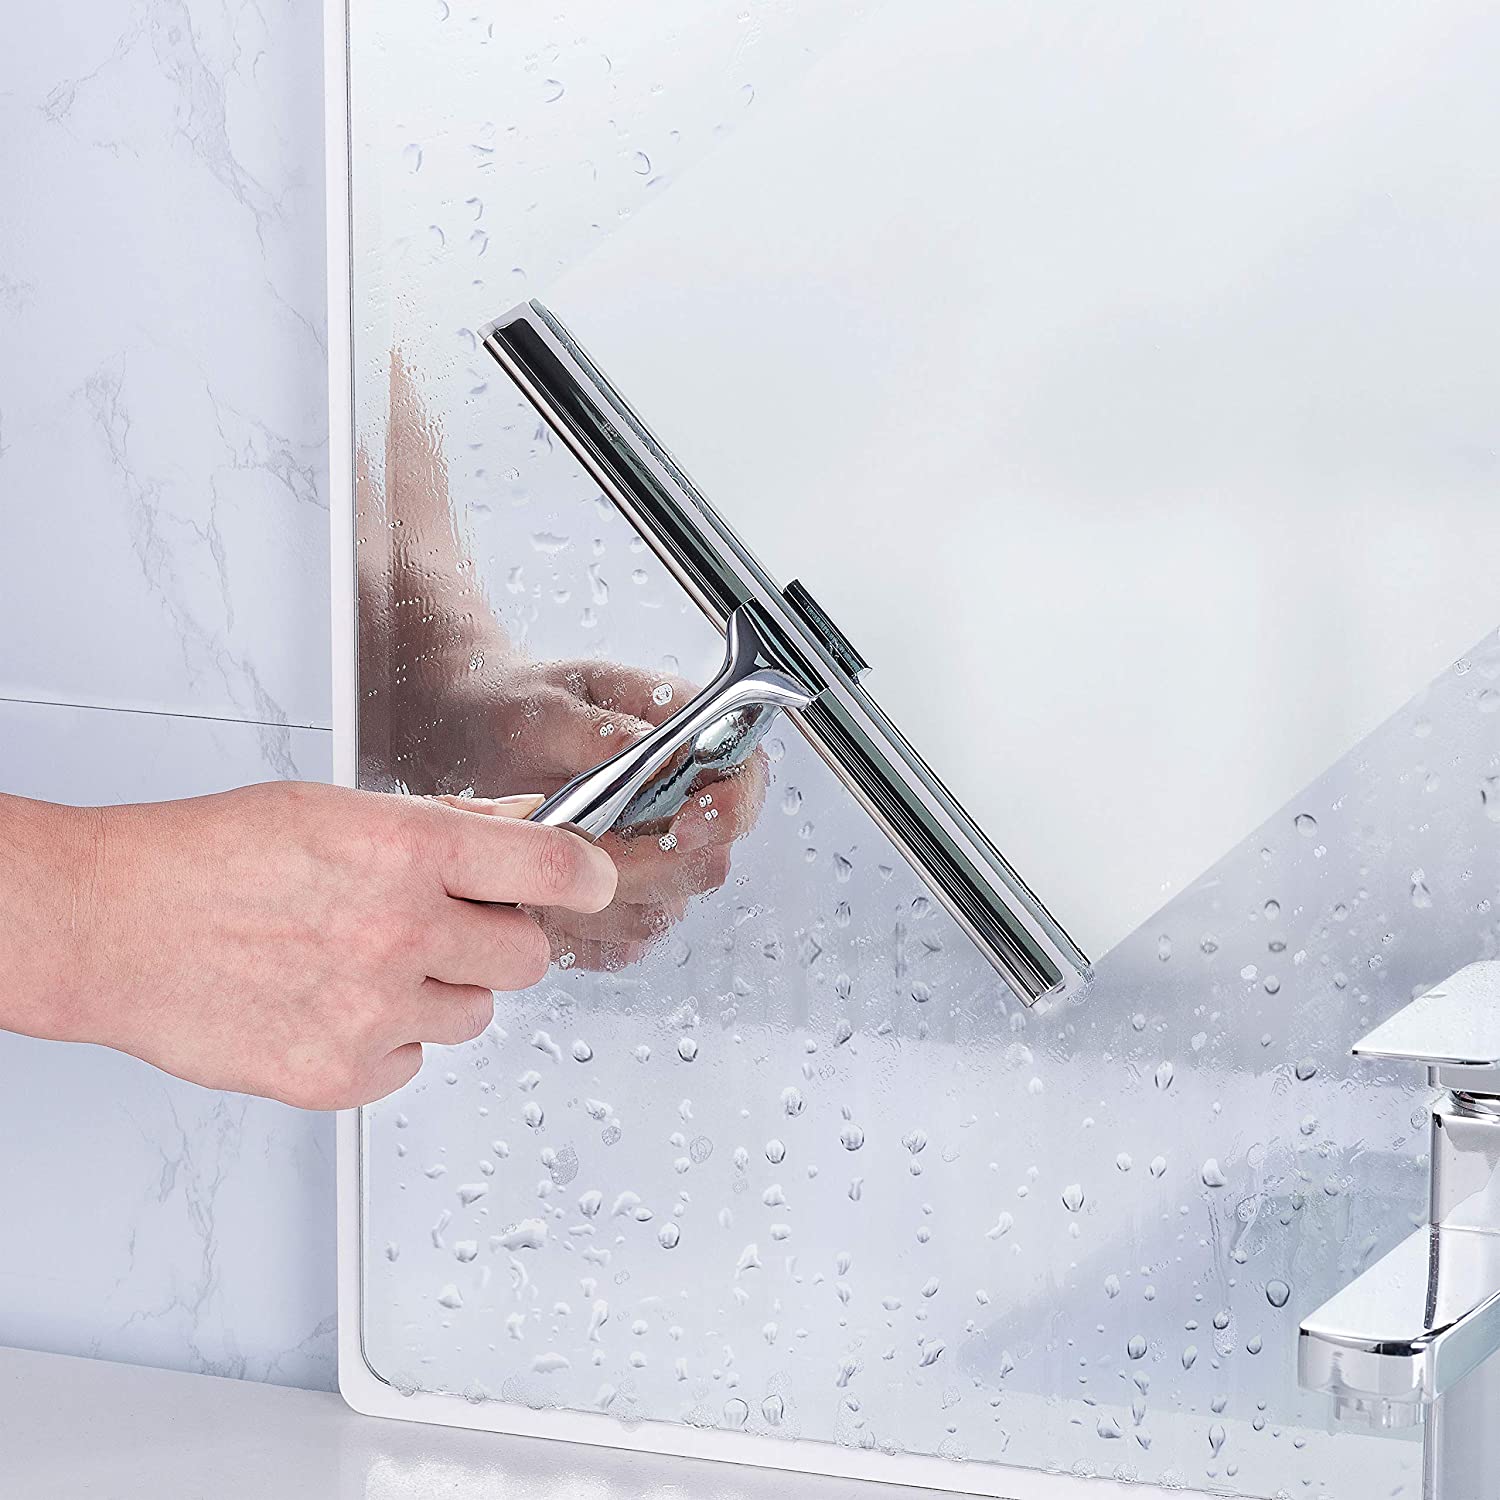 YouYeap Shower Squeegee Clear Glass Wall Cleaner Stainless Steel with  Suction Storage Hook -10'', Chrome